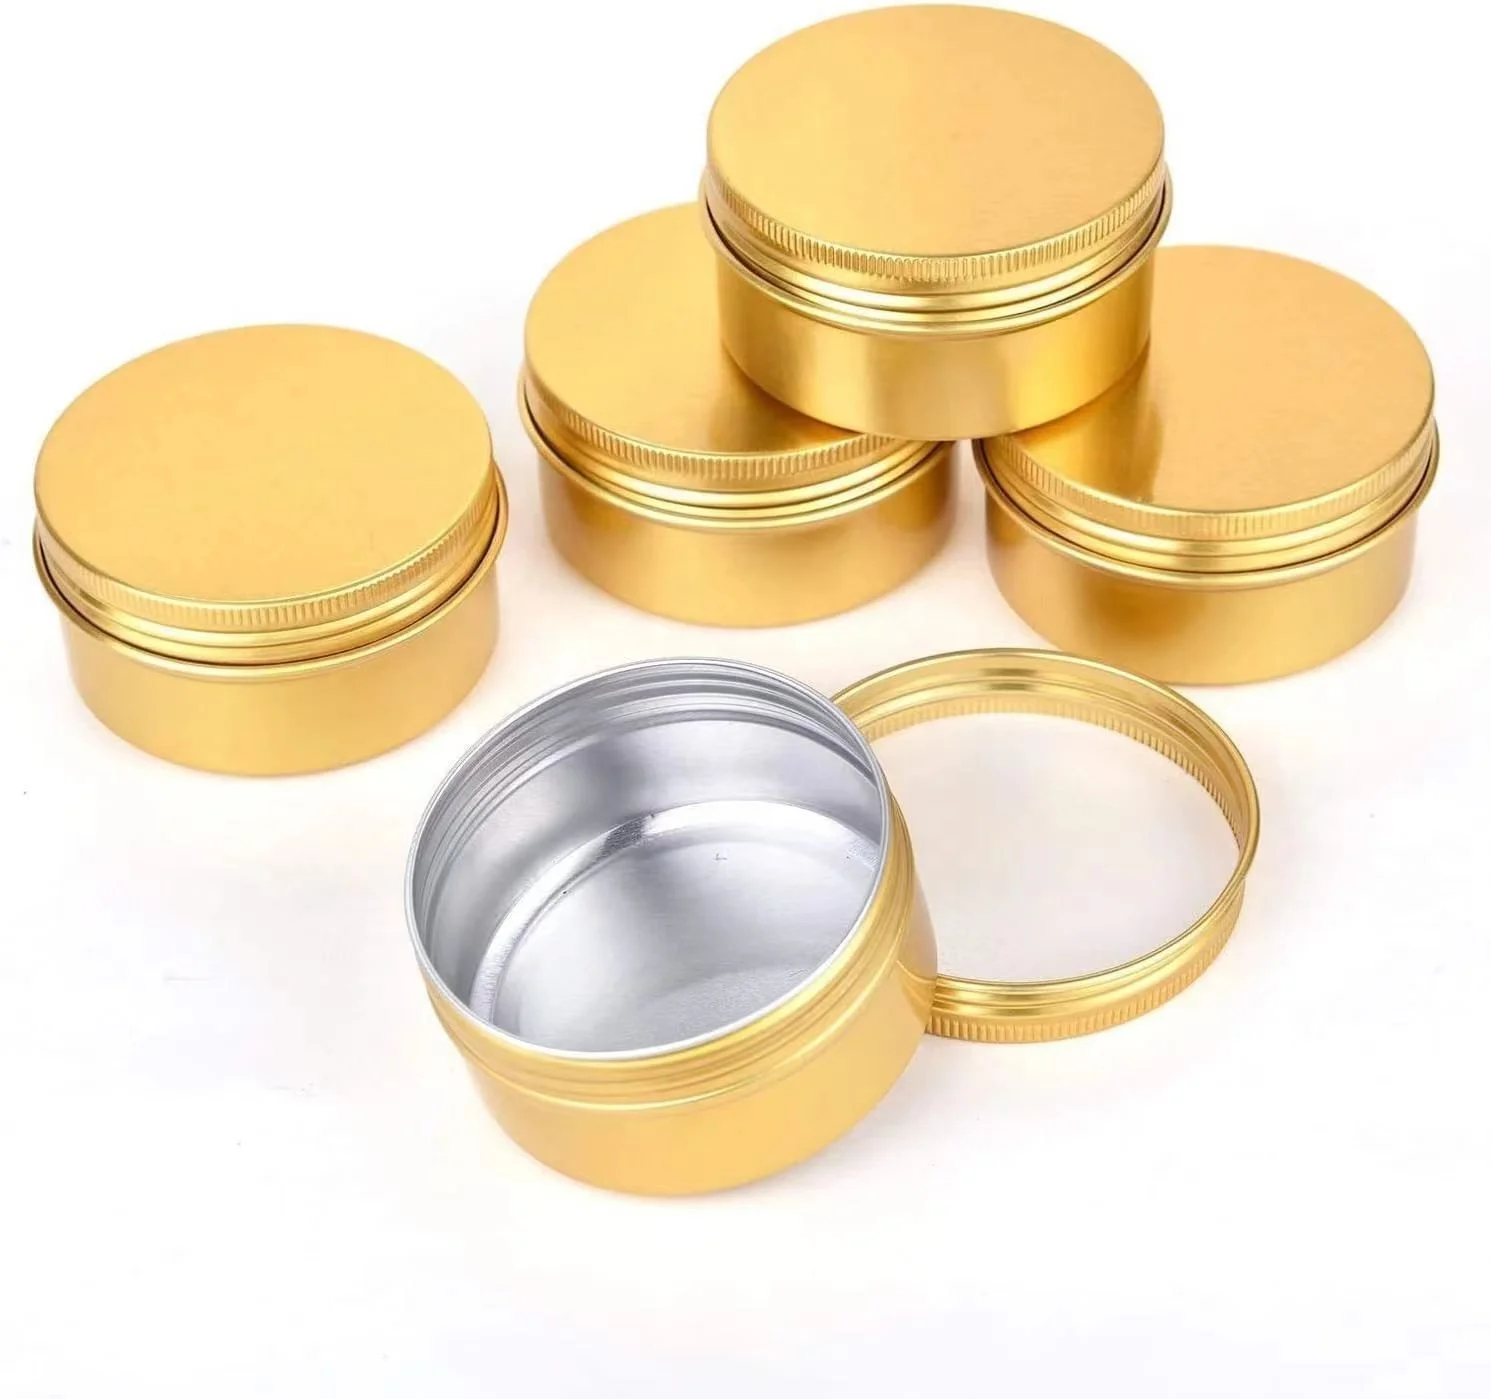 

Metal Round Balm Tins Aluminum cosmetic jars Cans Empty Containers with screw lids for salve spices candles